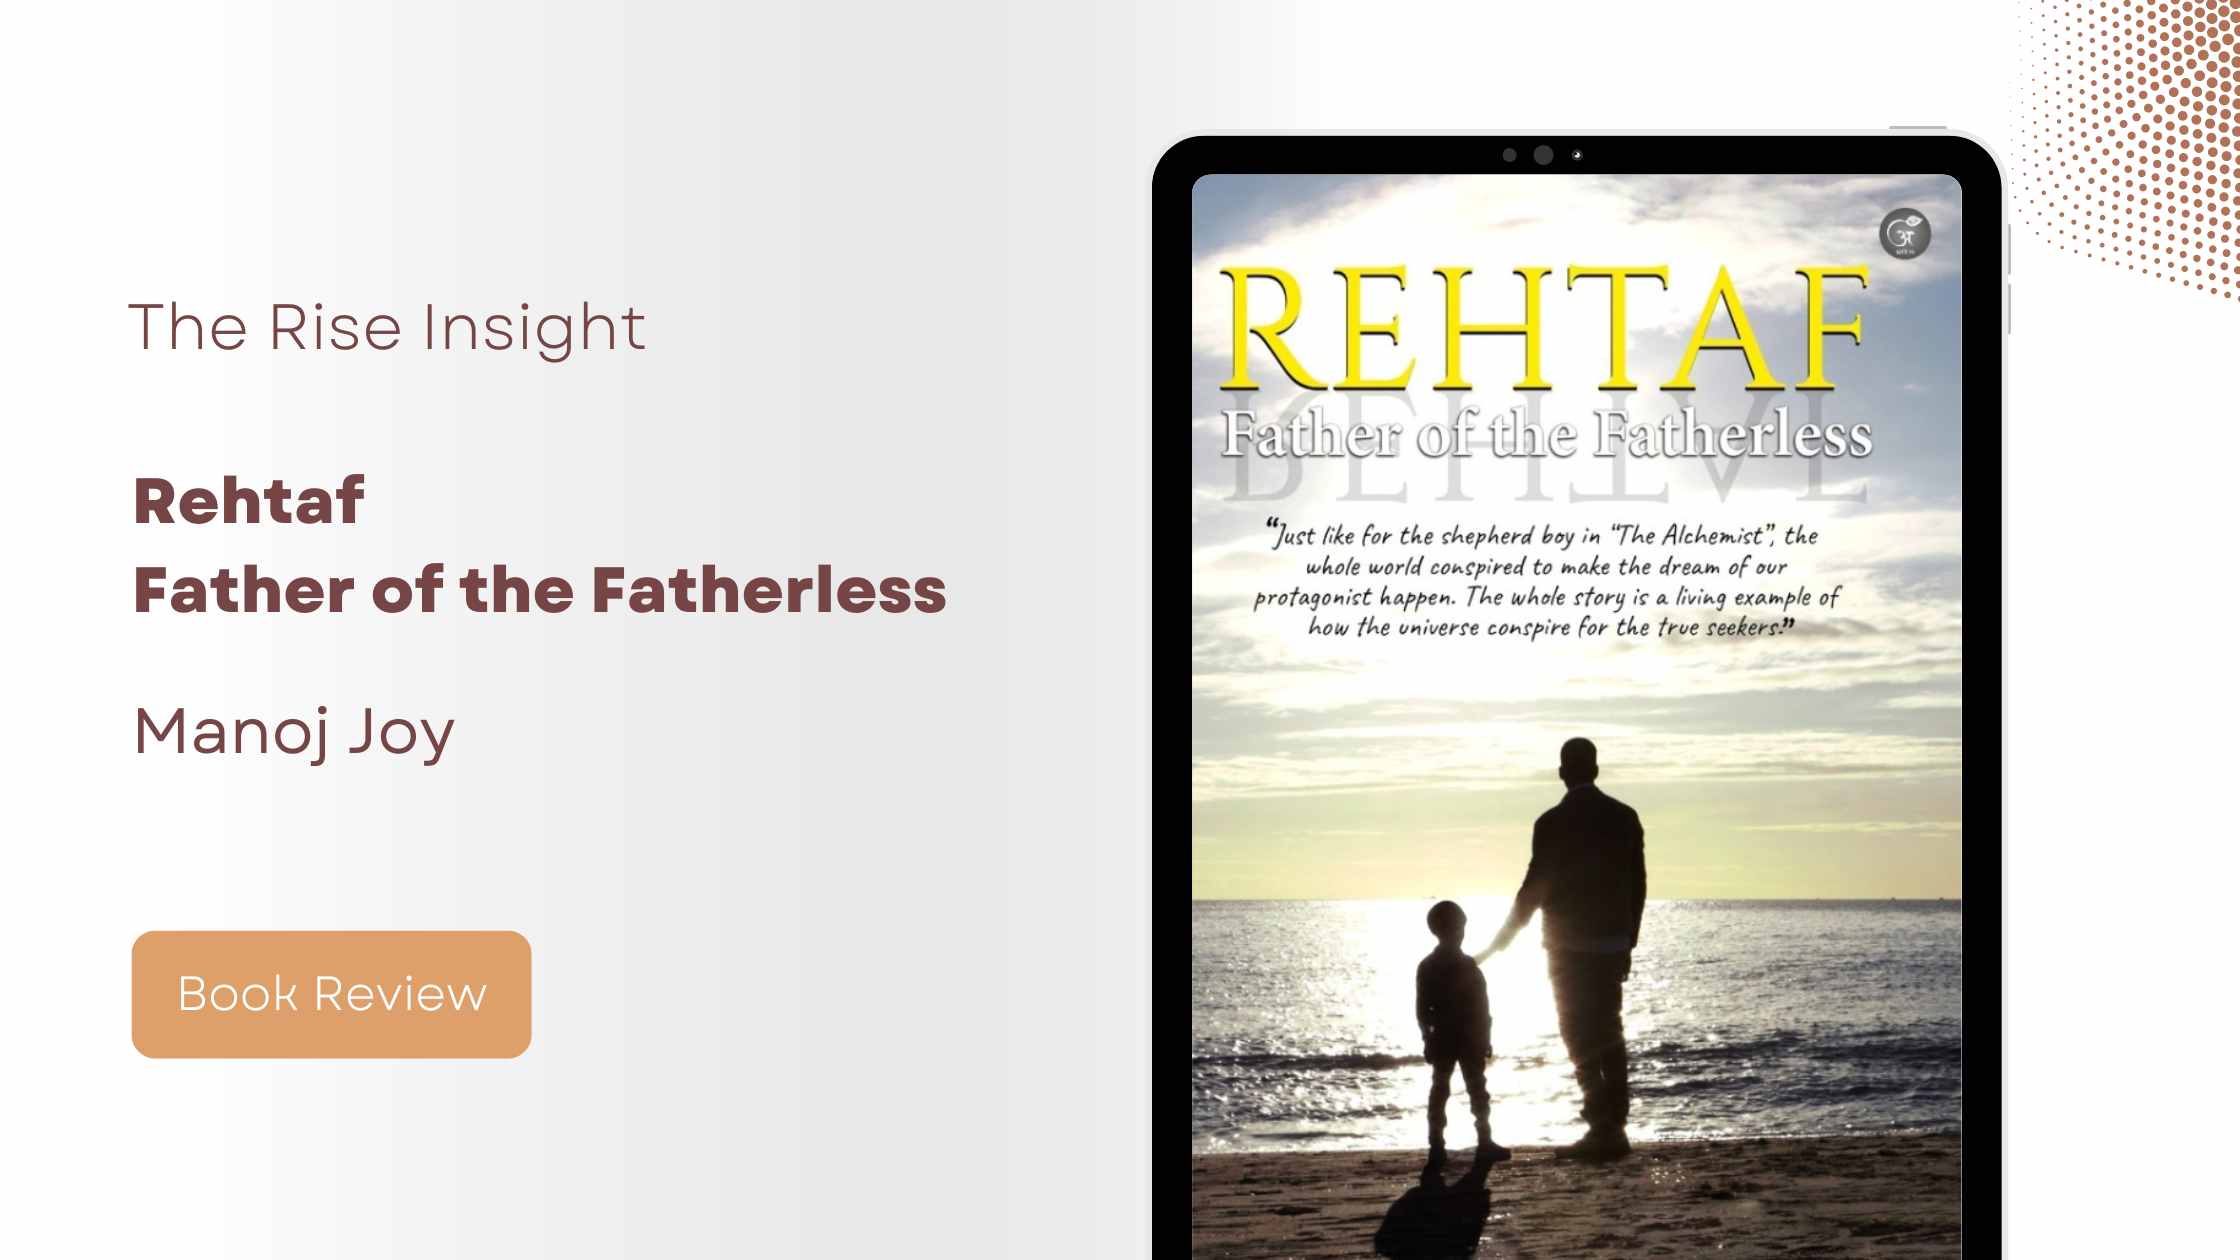 A Heartfelt Journey of Discovery: A Review of “Rehtaf: Father of the Fatherless” by Manoj Joy